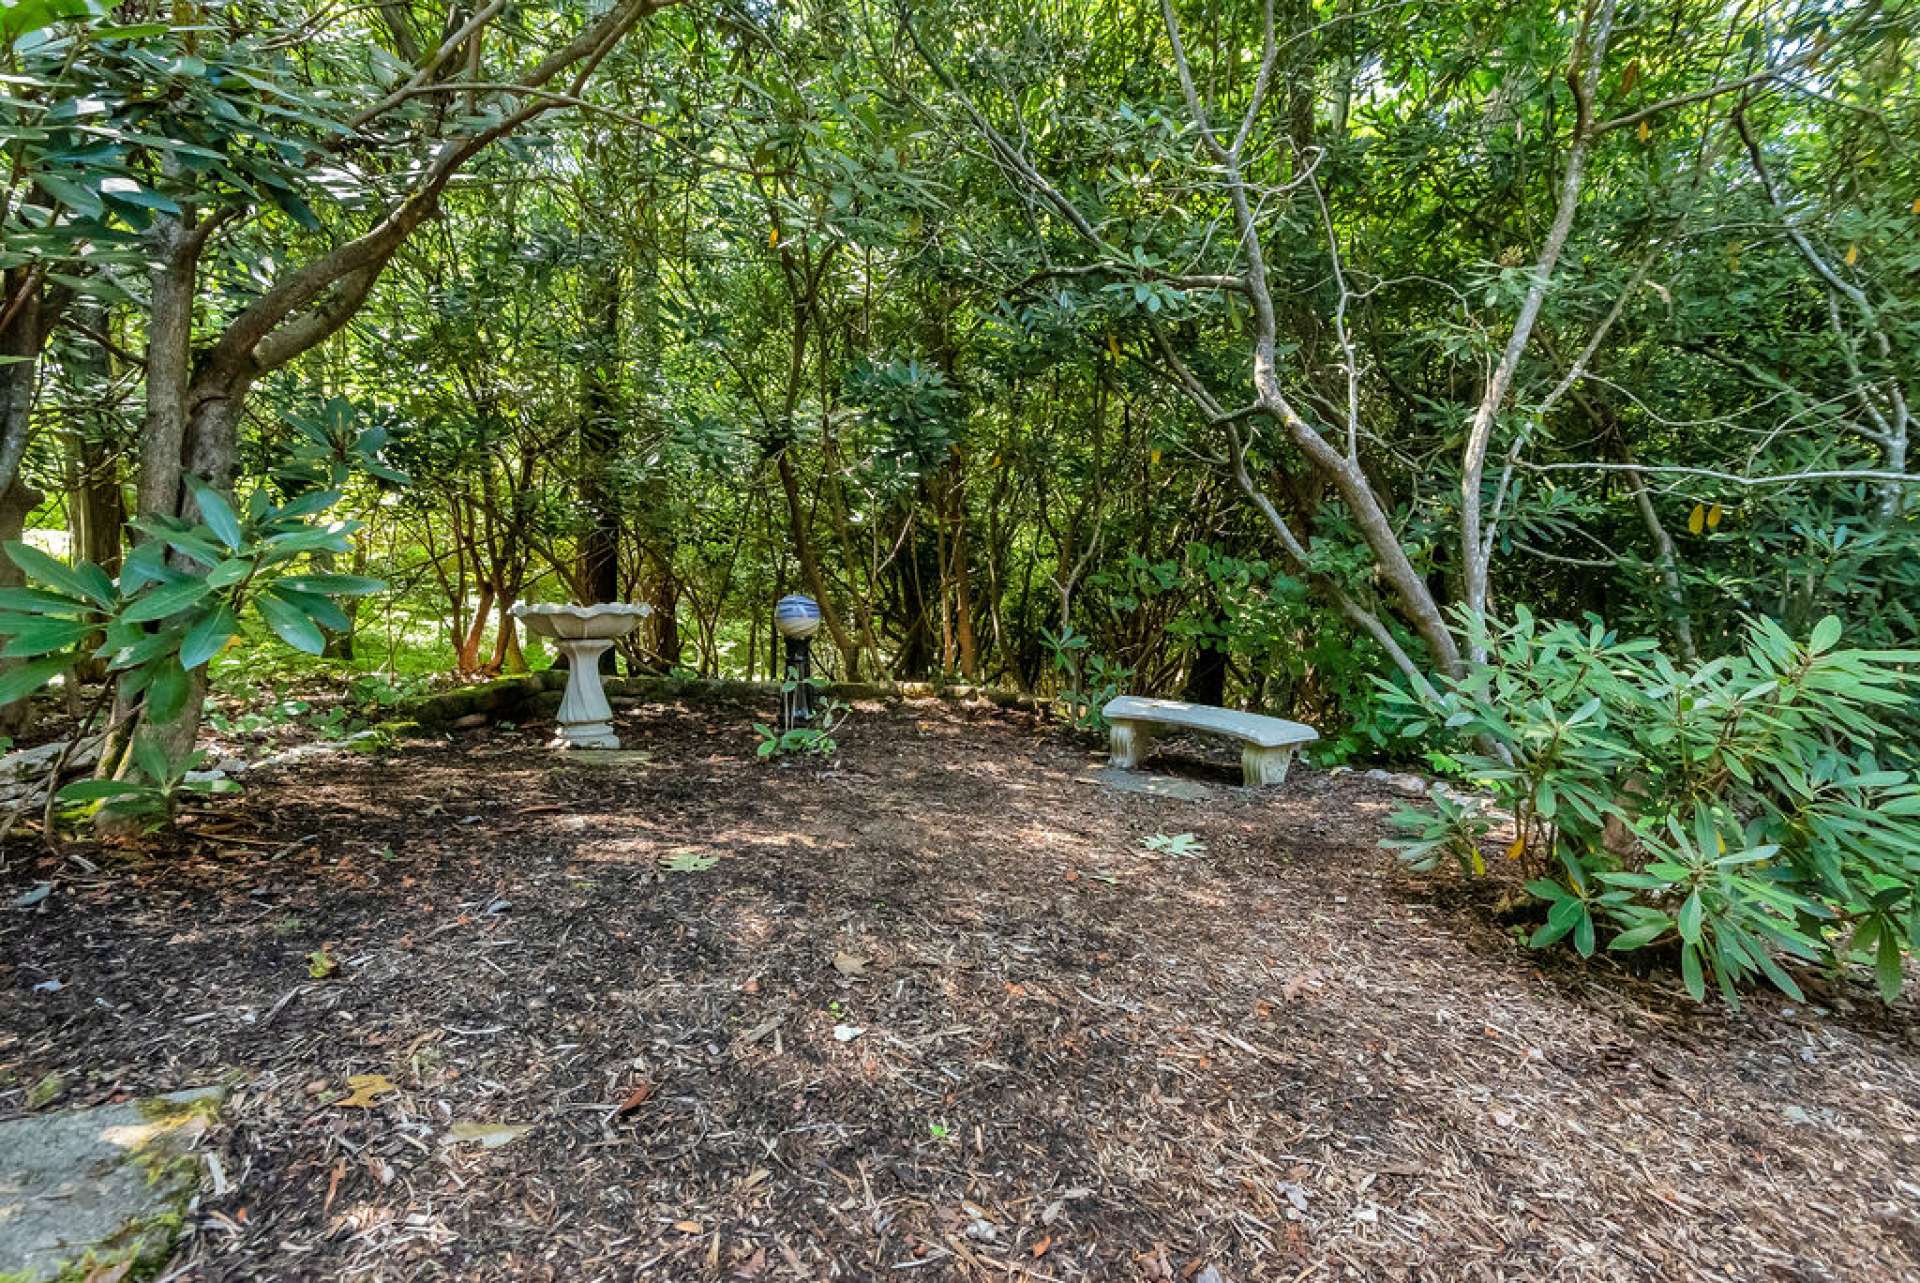 This property offers so many places to sit and enjoy nature.